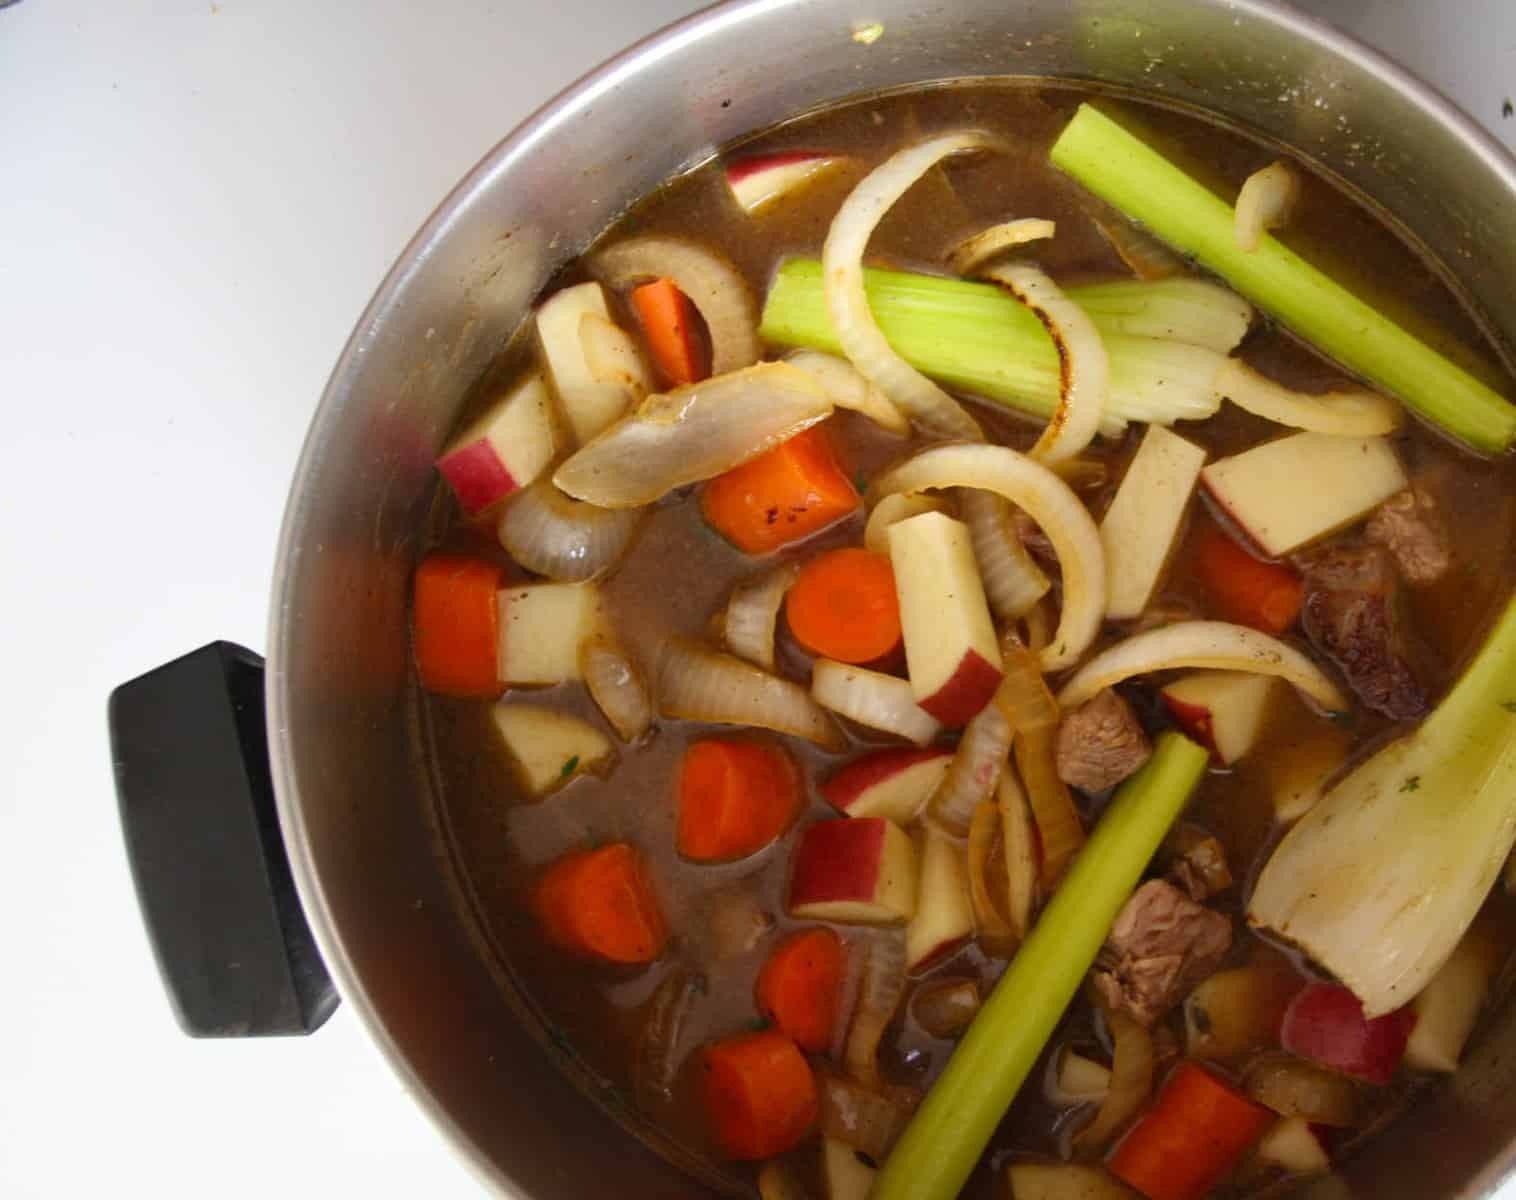 A pot of soup ingredients simmering on the stove.